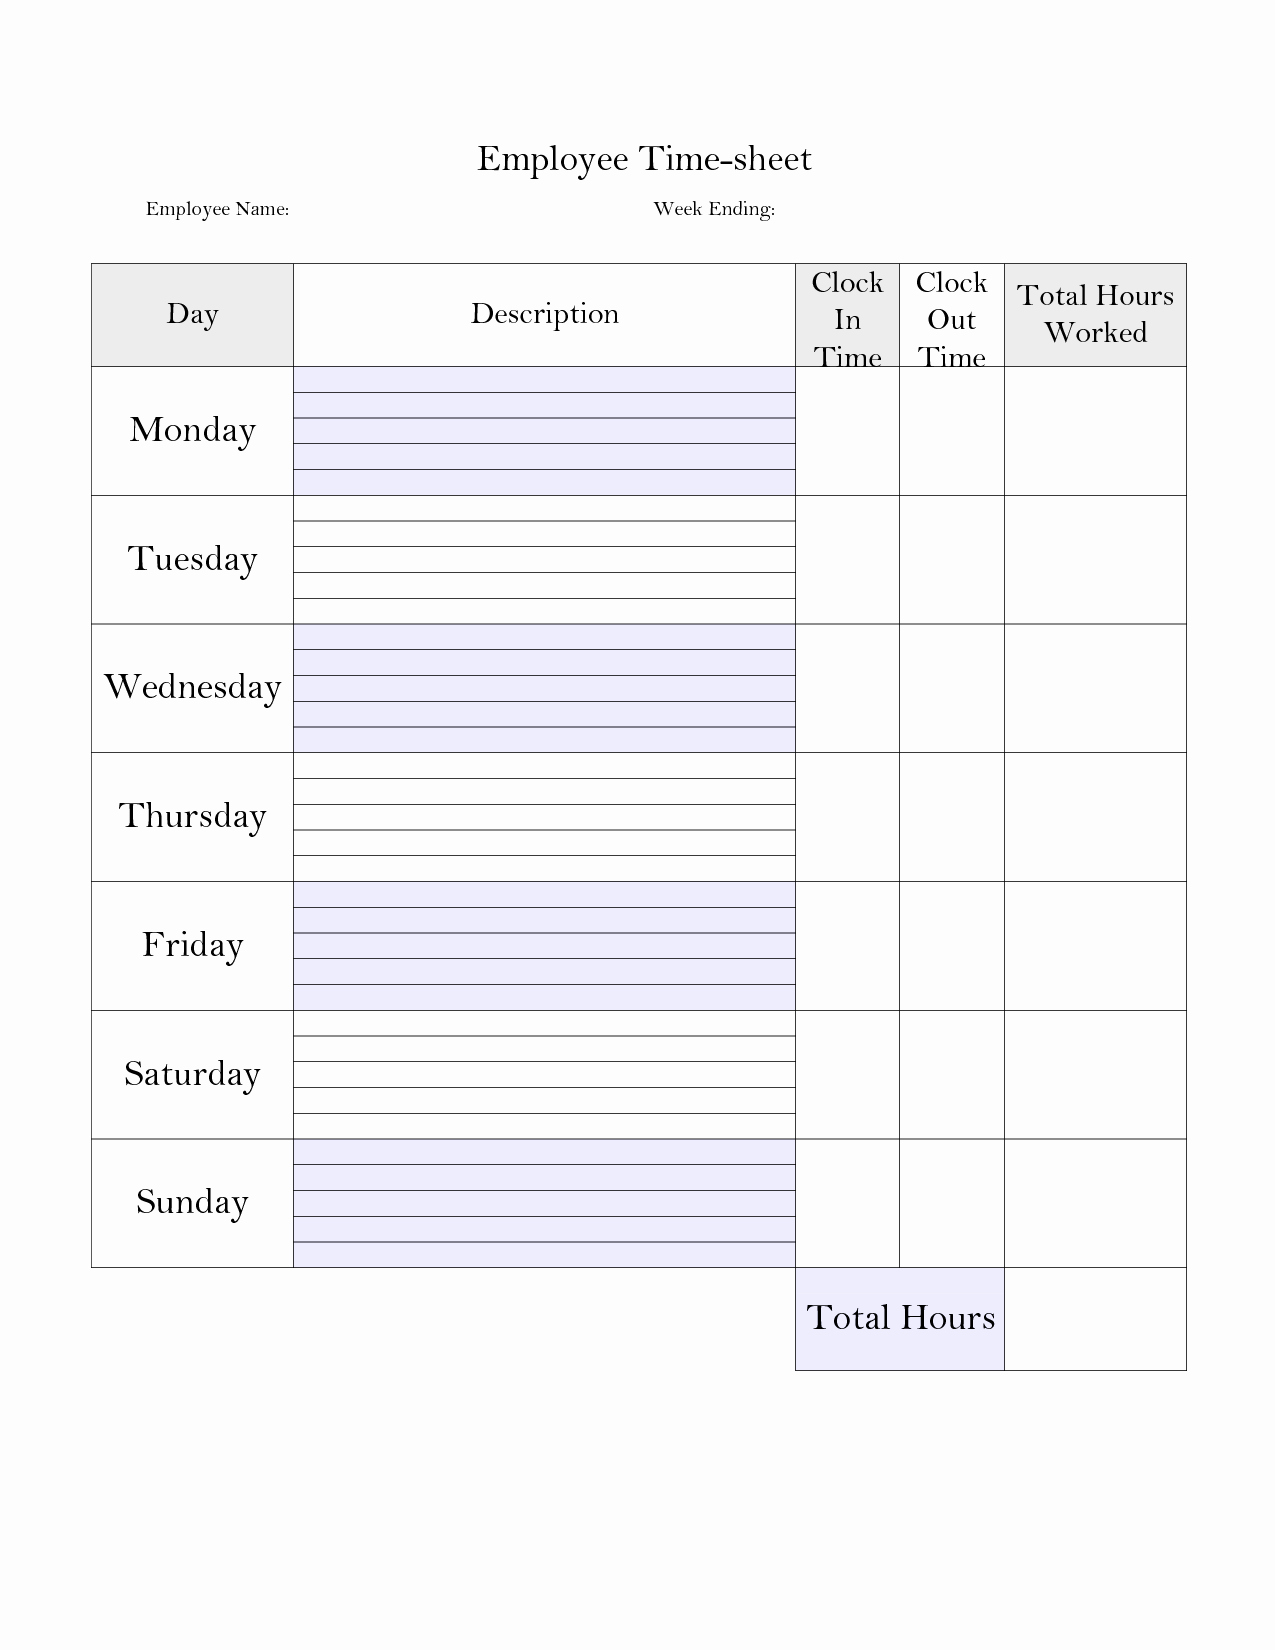 Construction Time Card Template Fresh Printable Weekly Employee Time Card Google Search